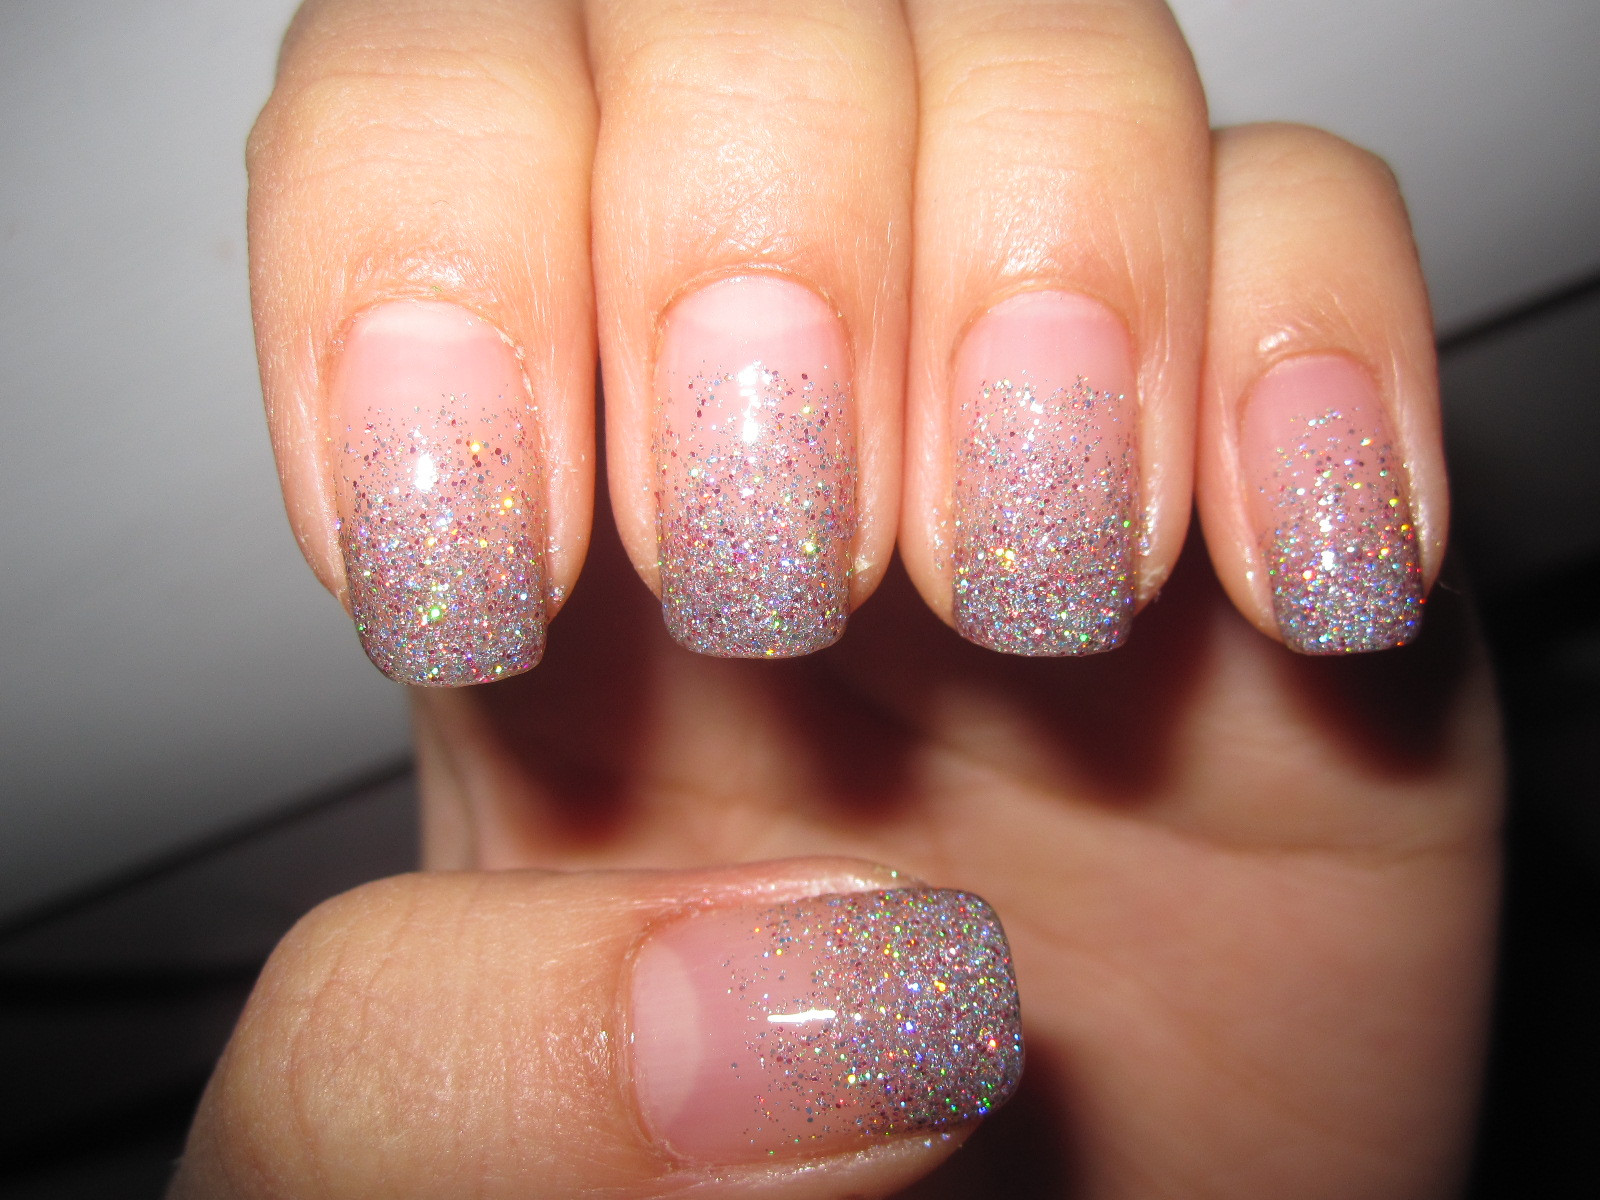 Glitter Gel Nails Pictures
 Jelly s Nails Glitter Gra nt Nails